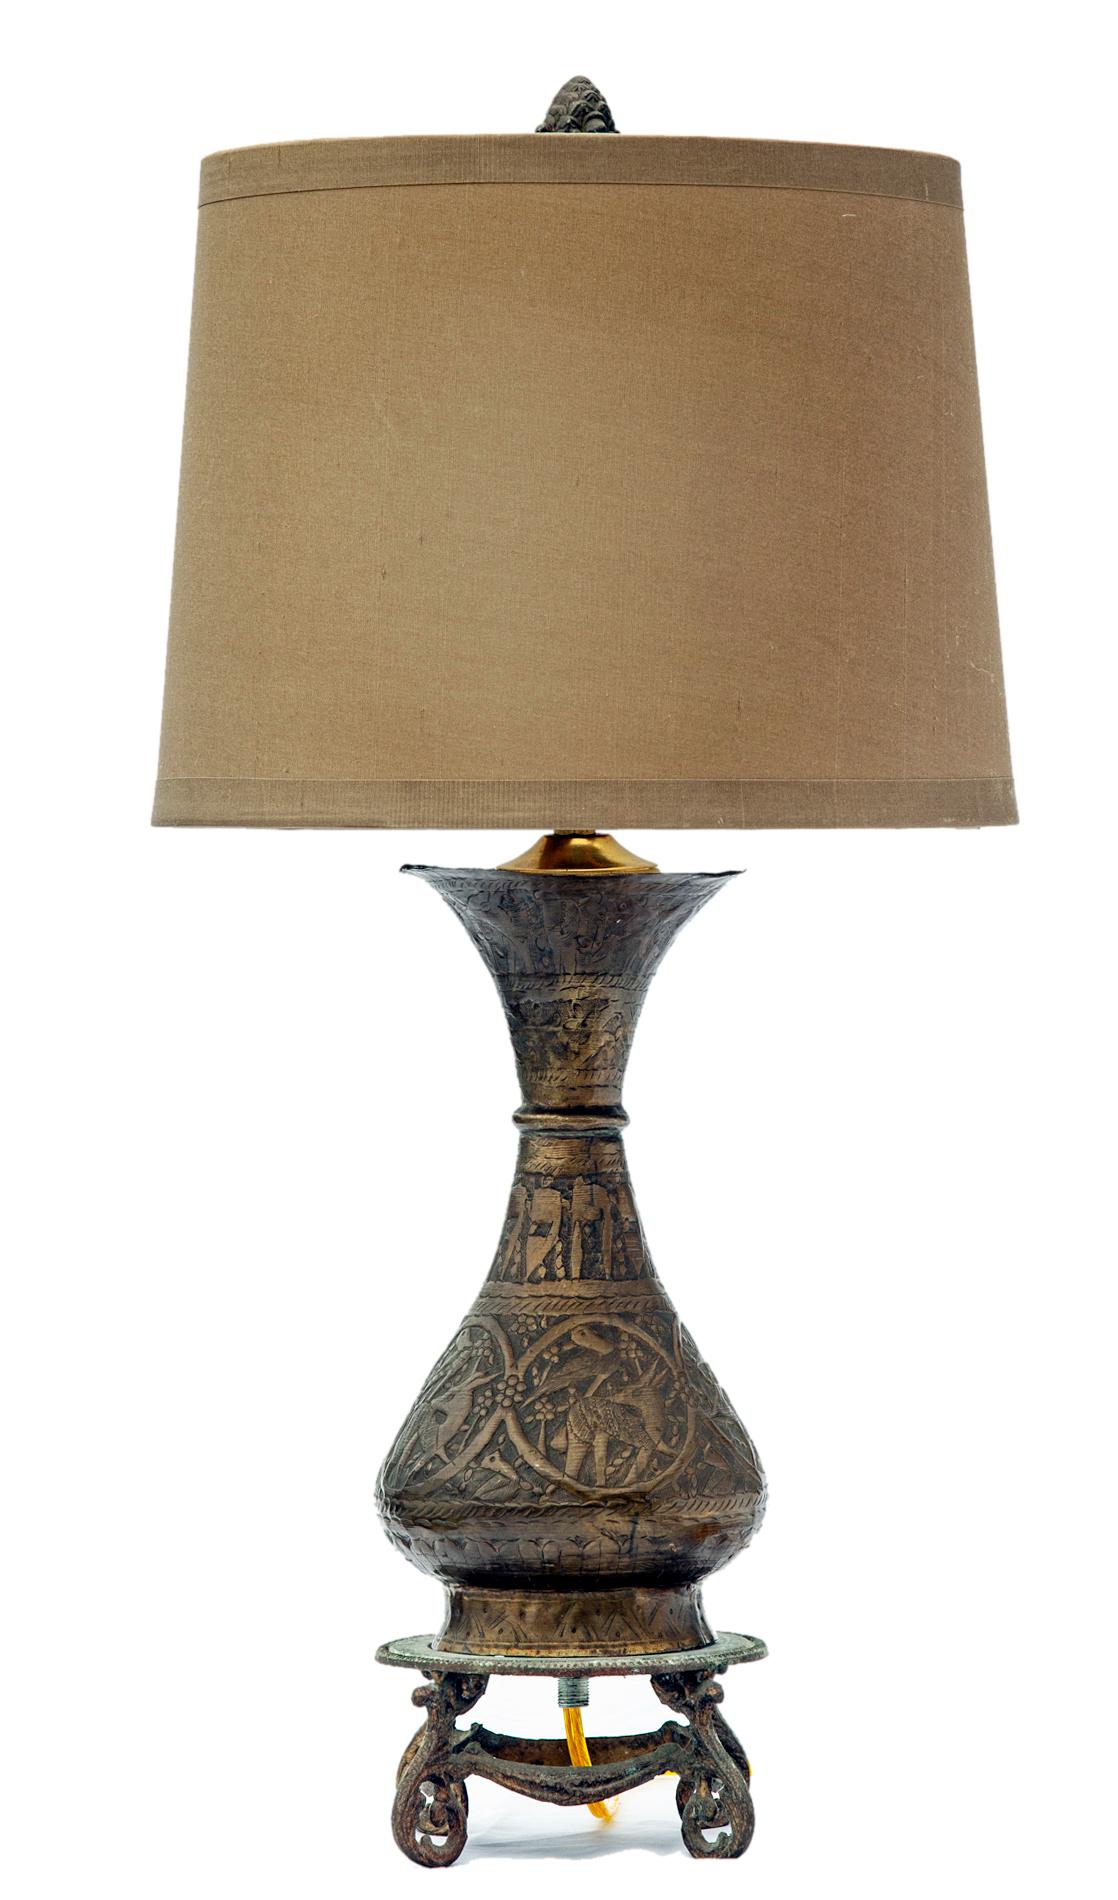 Finely etched Turkish antique brass vase mounted as a lamp, the vase sits on a white metal base.
The RH silk lampshade is new with no wear.